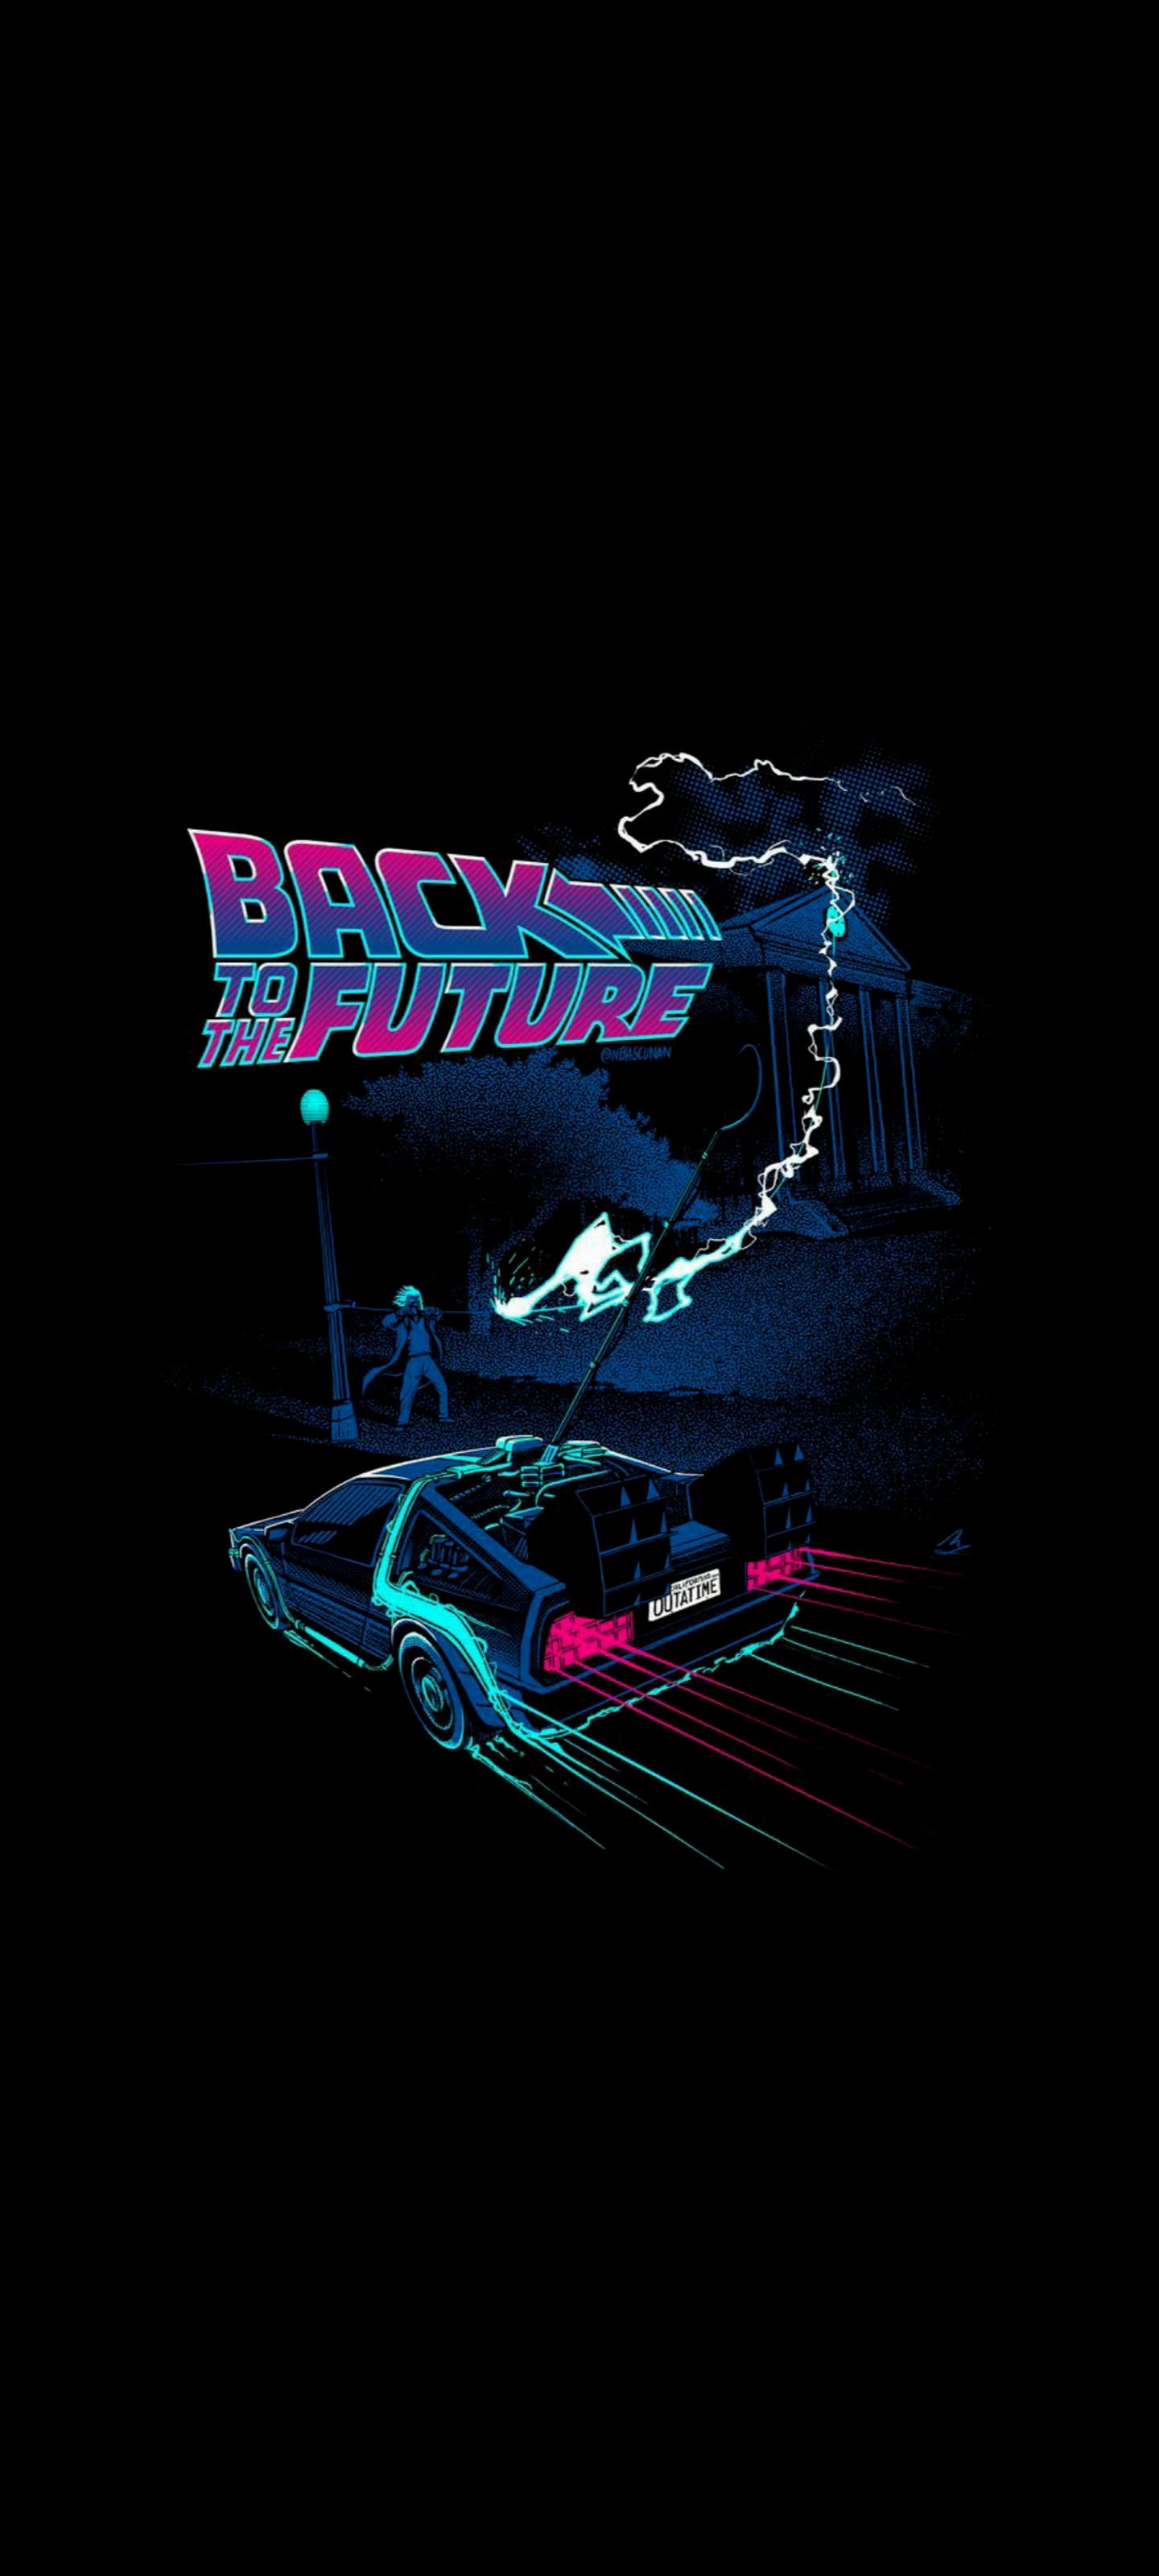 Back to the future (1440x3200)